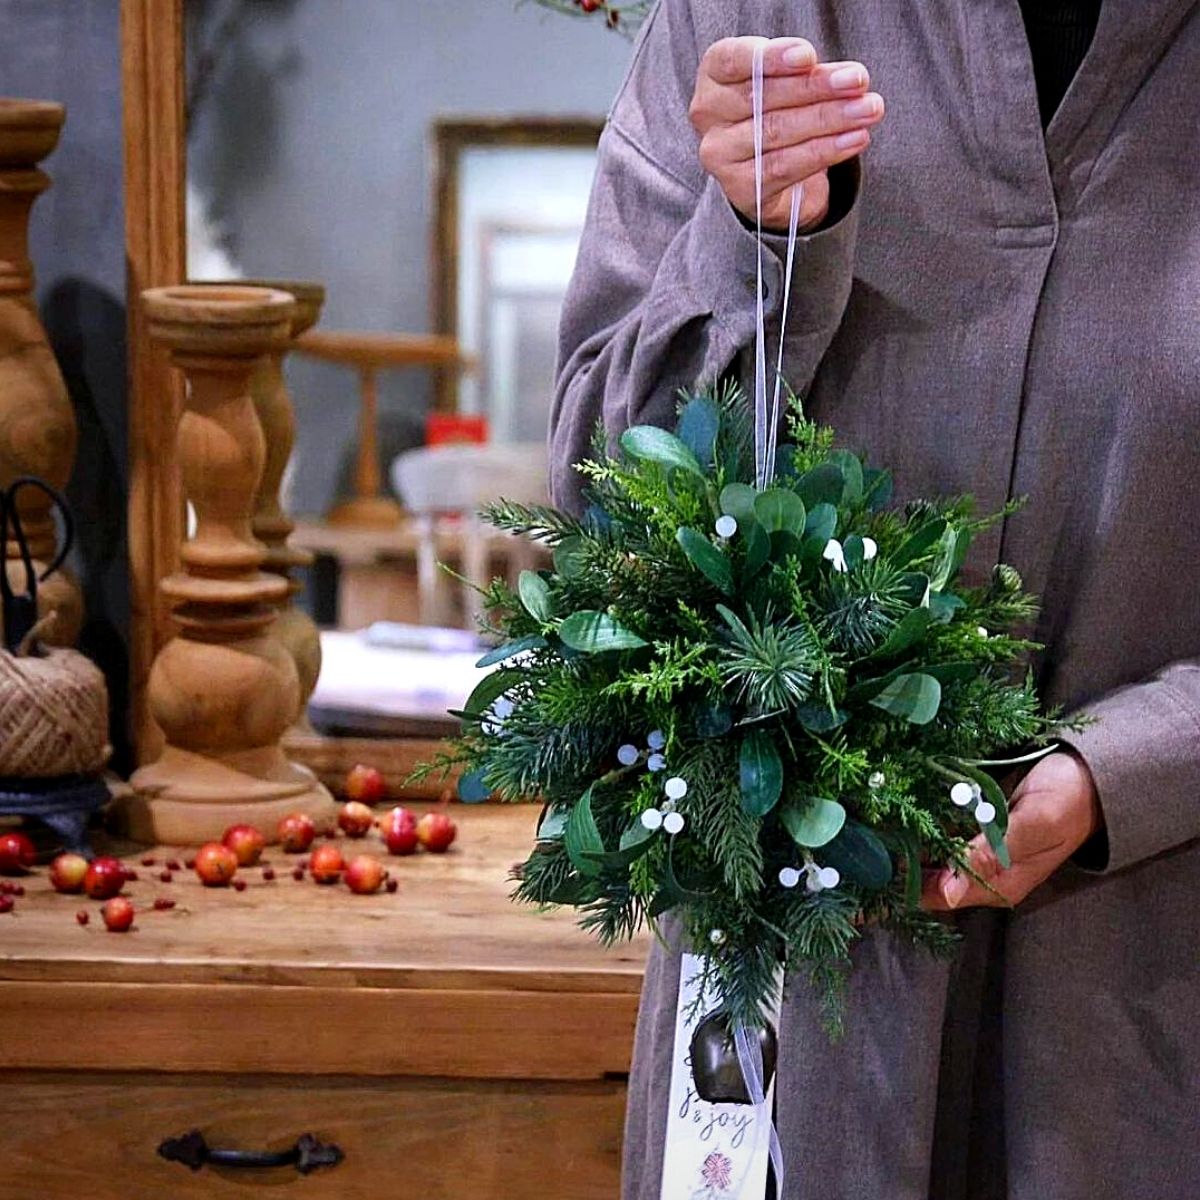 Mistletoe - The Famous Kissing Plant and Its Christmas Nuances - Article